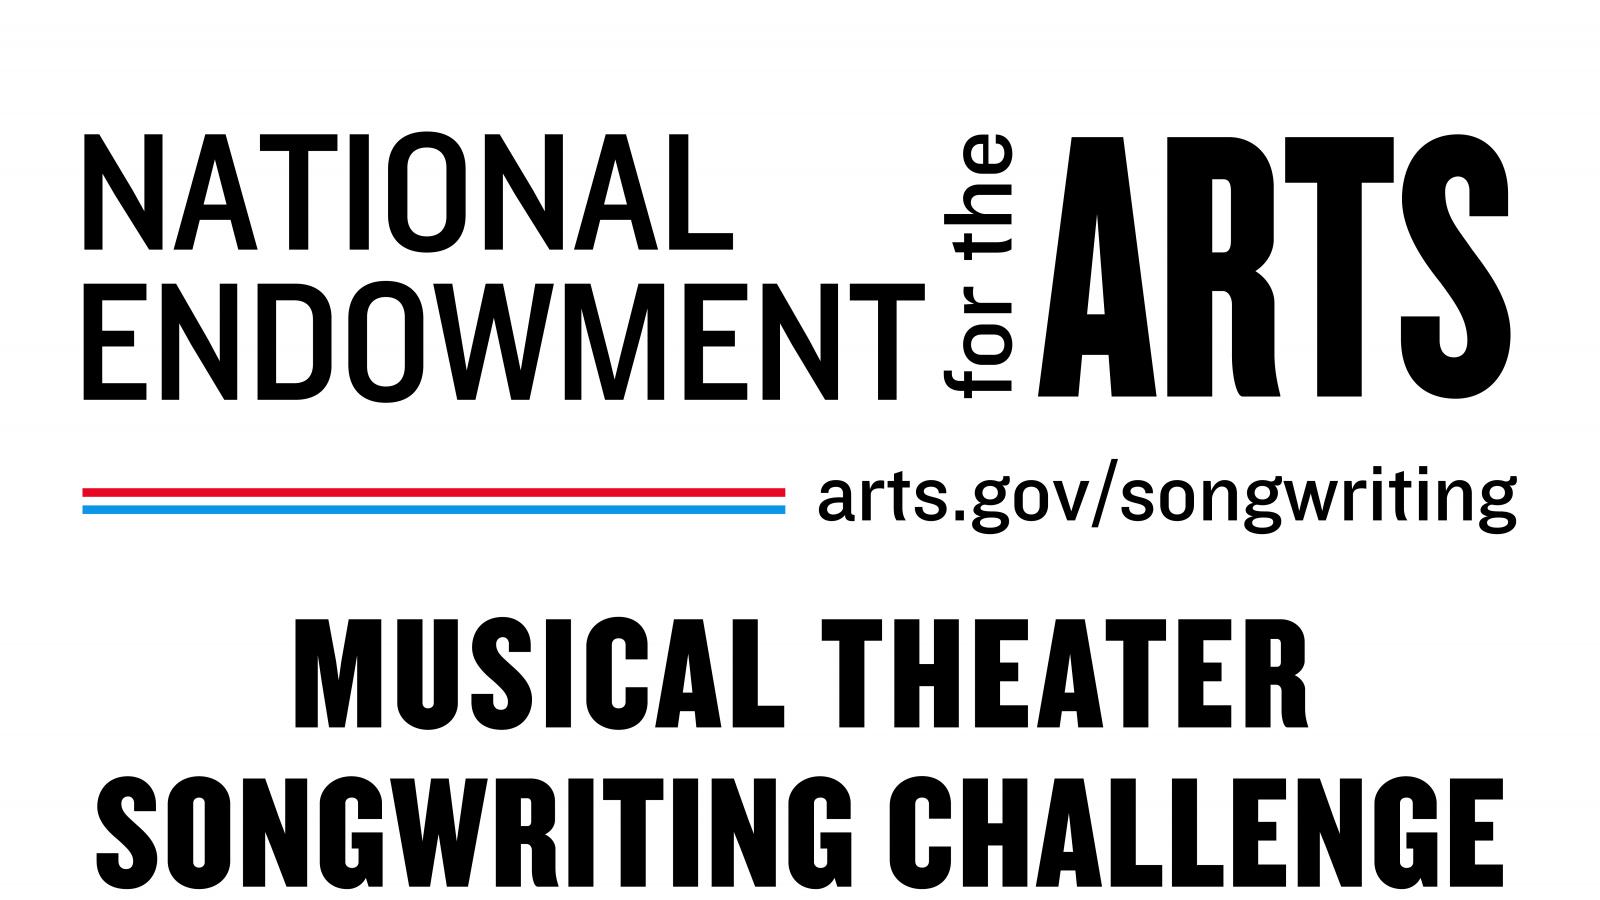 Logo for Musical Theater Songwriting Challenge